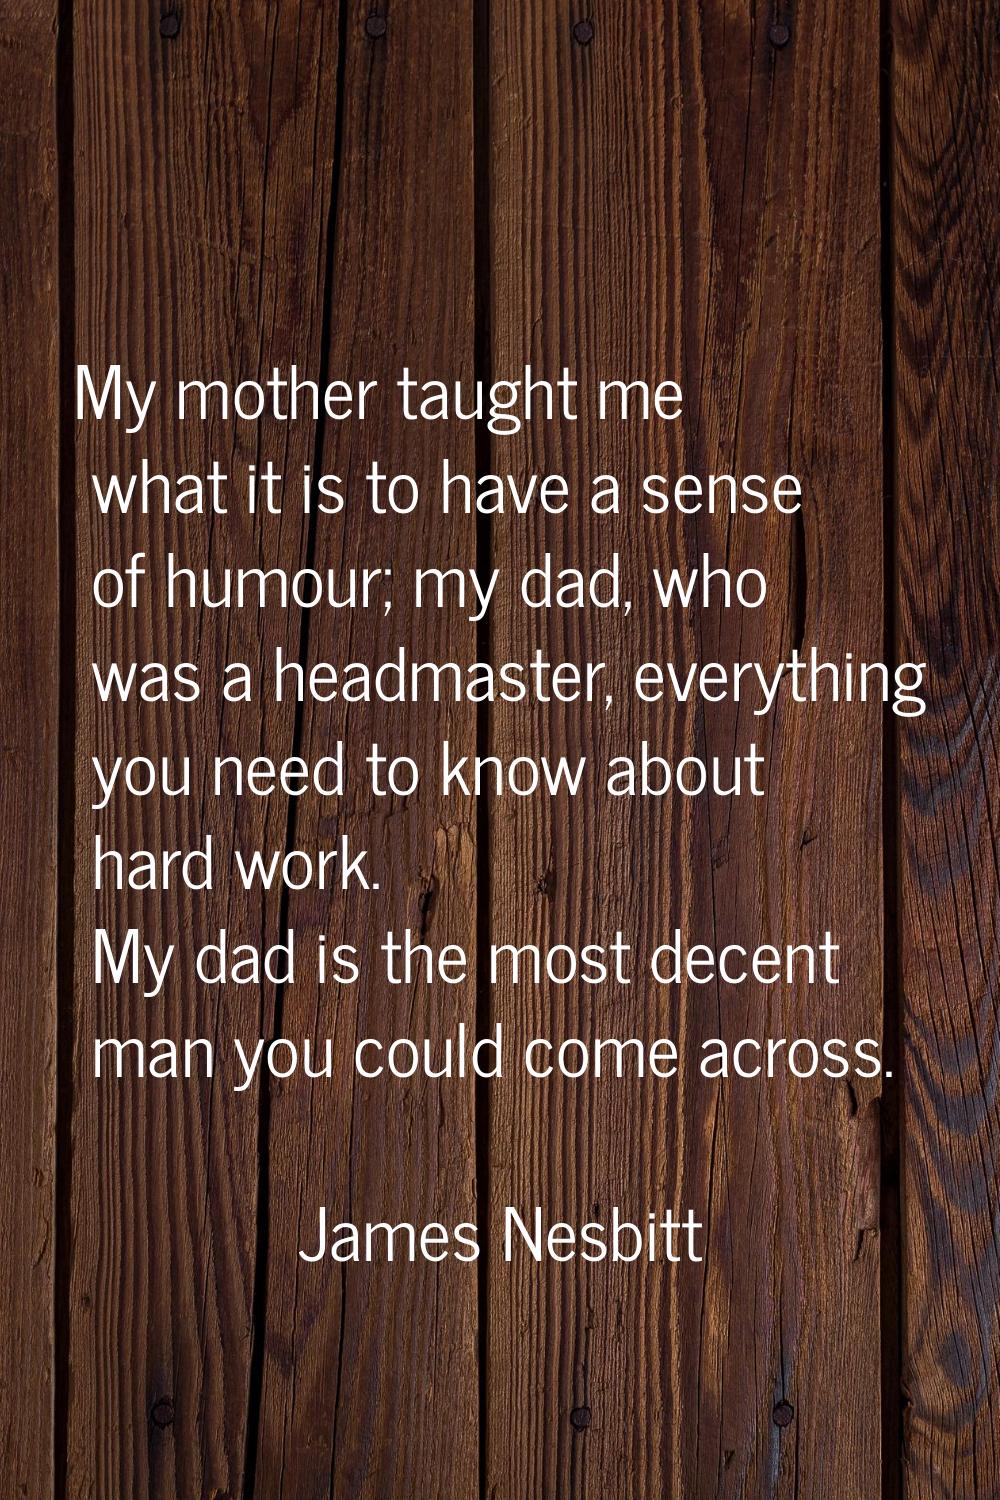 My mother taught me what it is to have a sense of humour; my dad, who was a headmaster, everything 